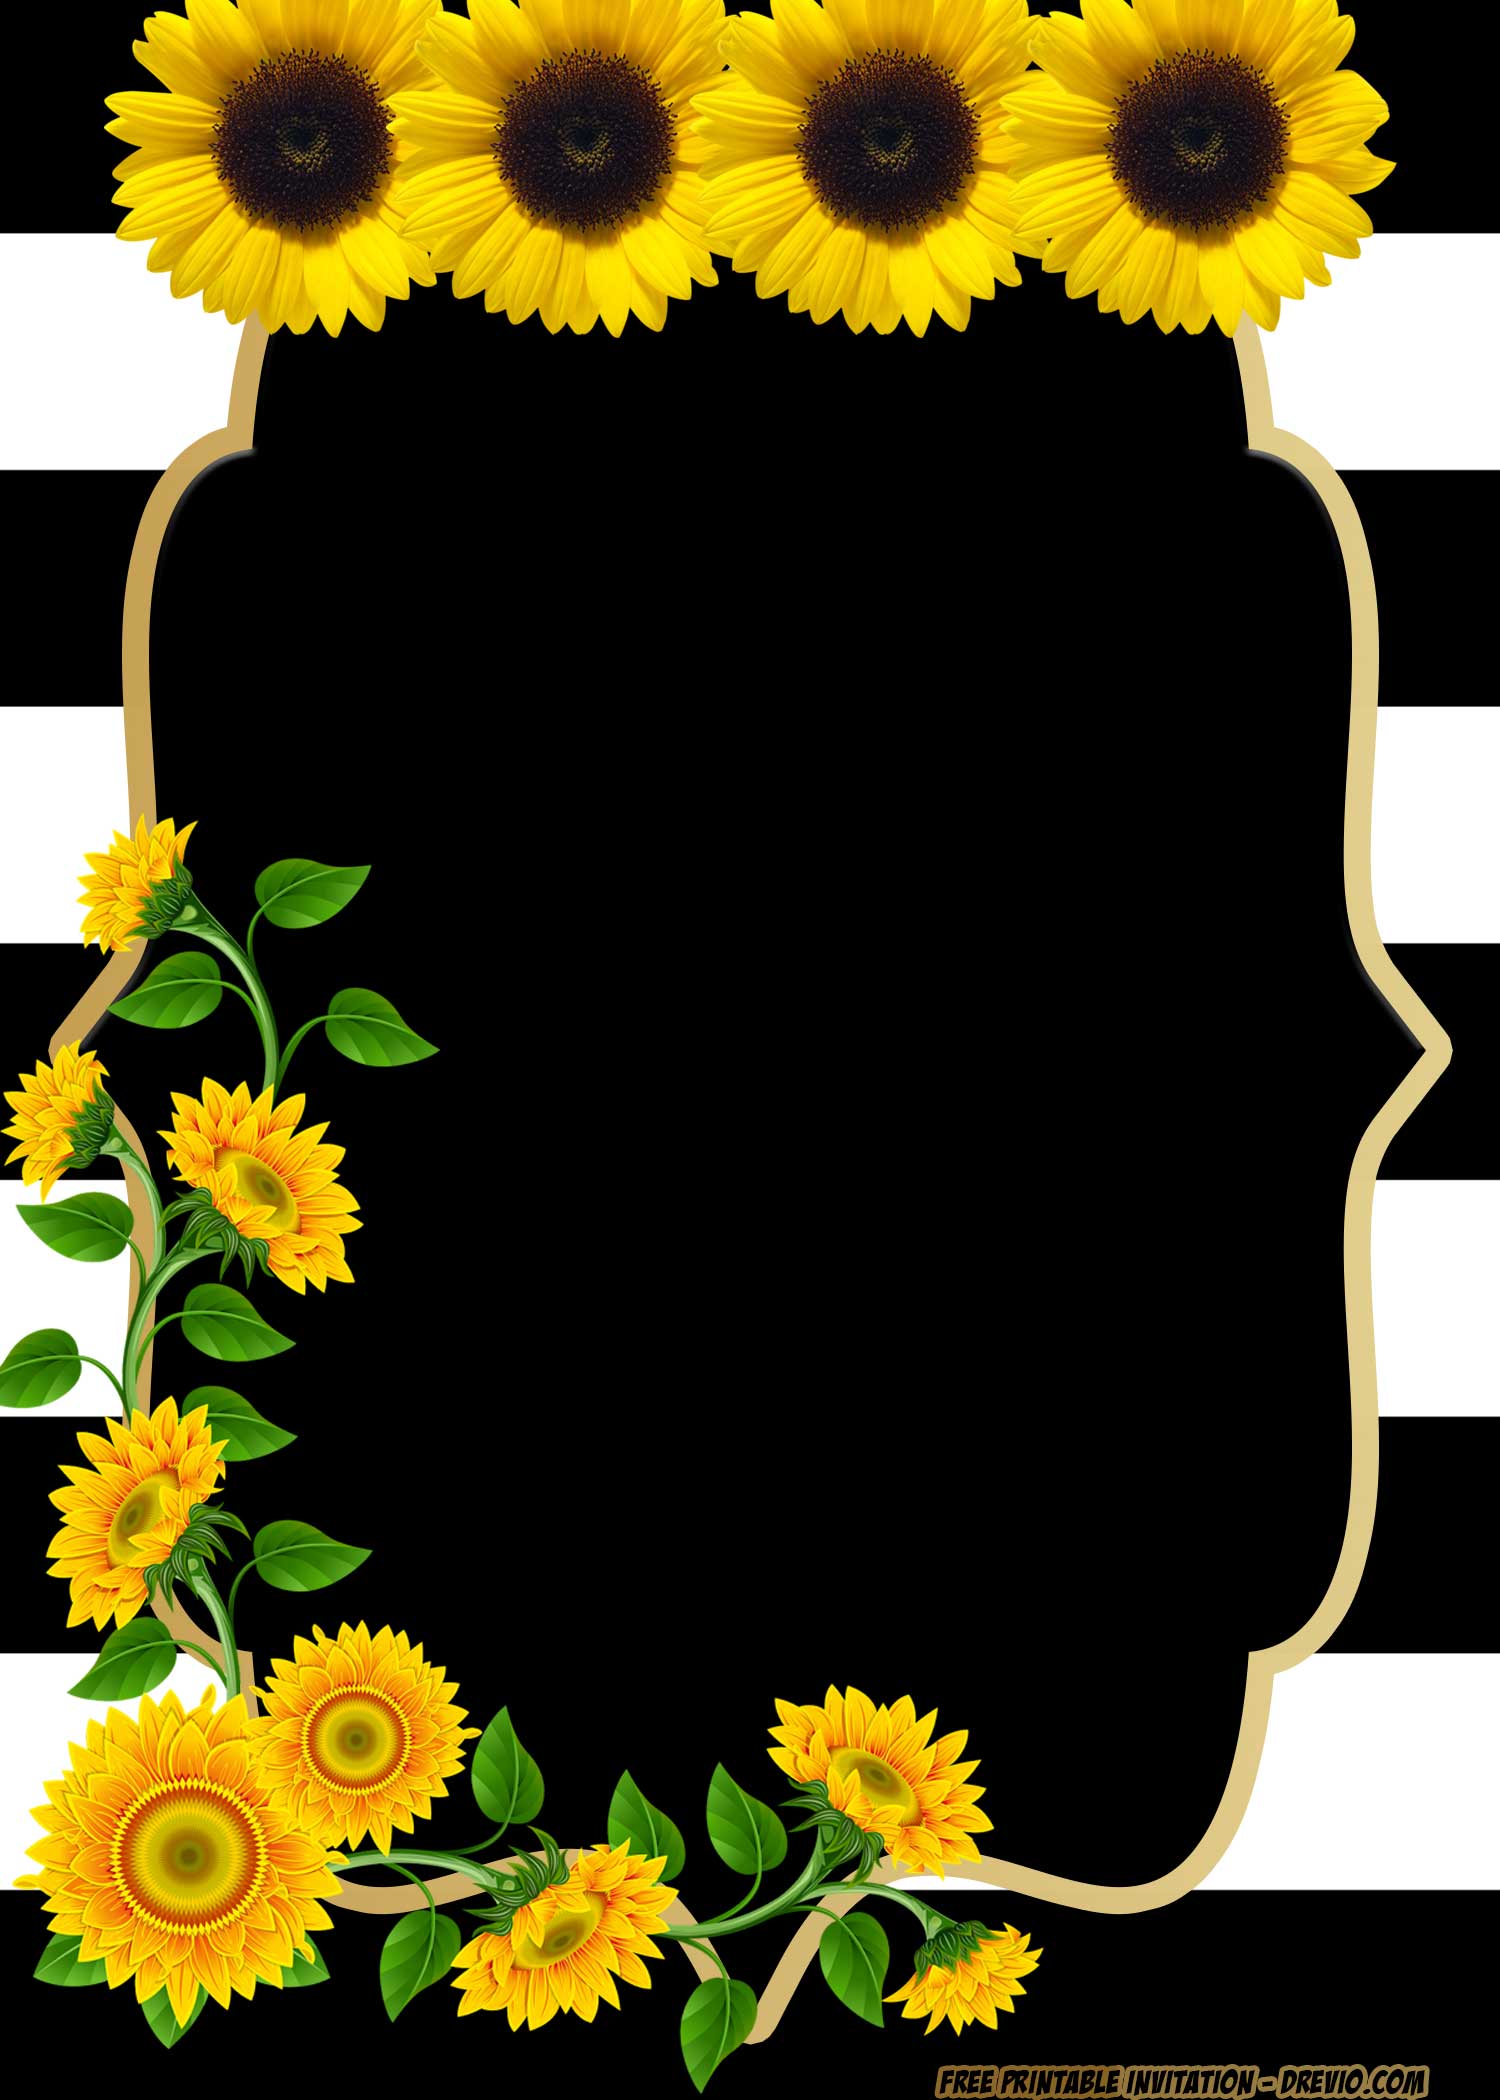 are-you-looking-for-a-step-by-step-sunflower-craft-to-make-with-your